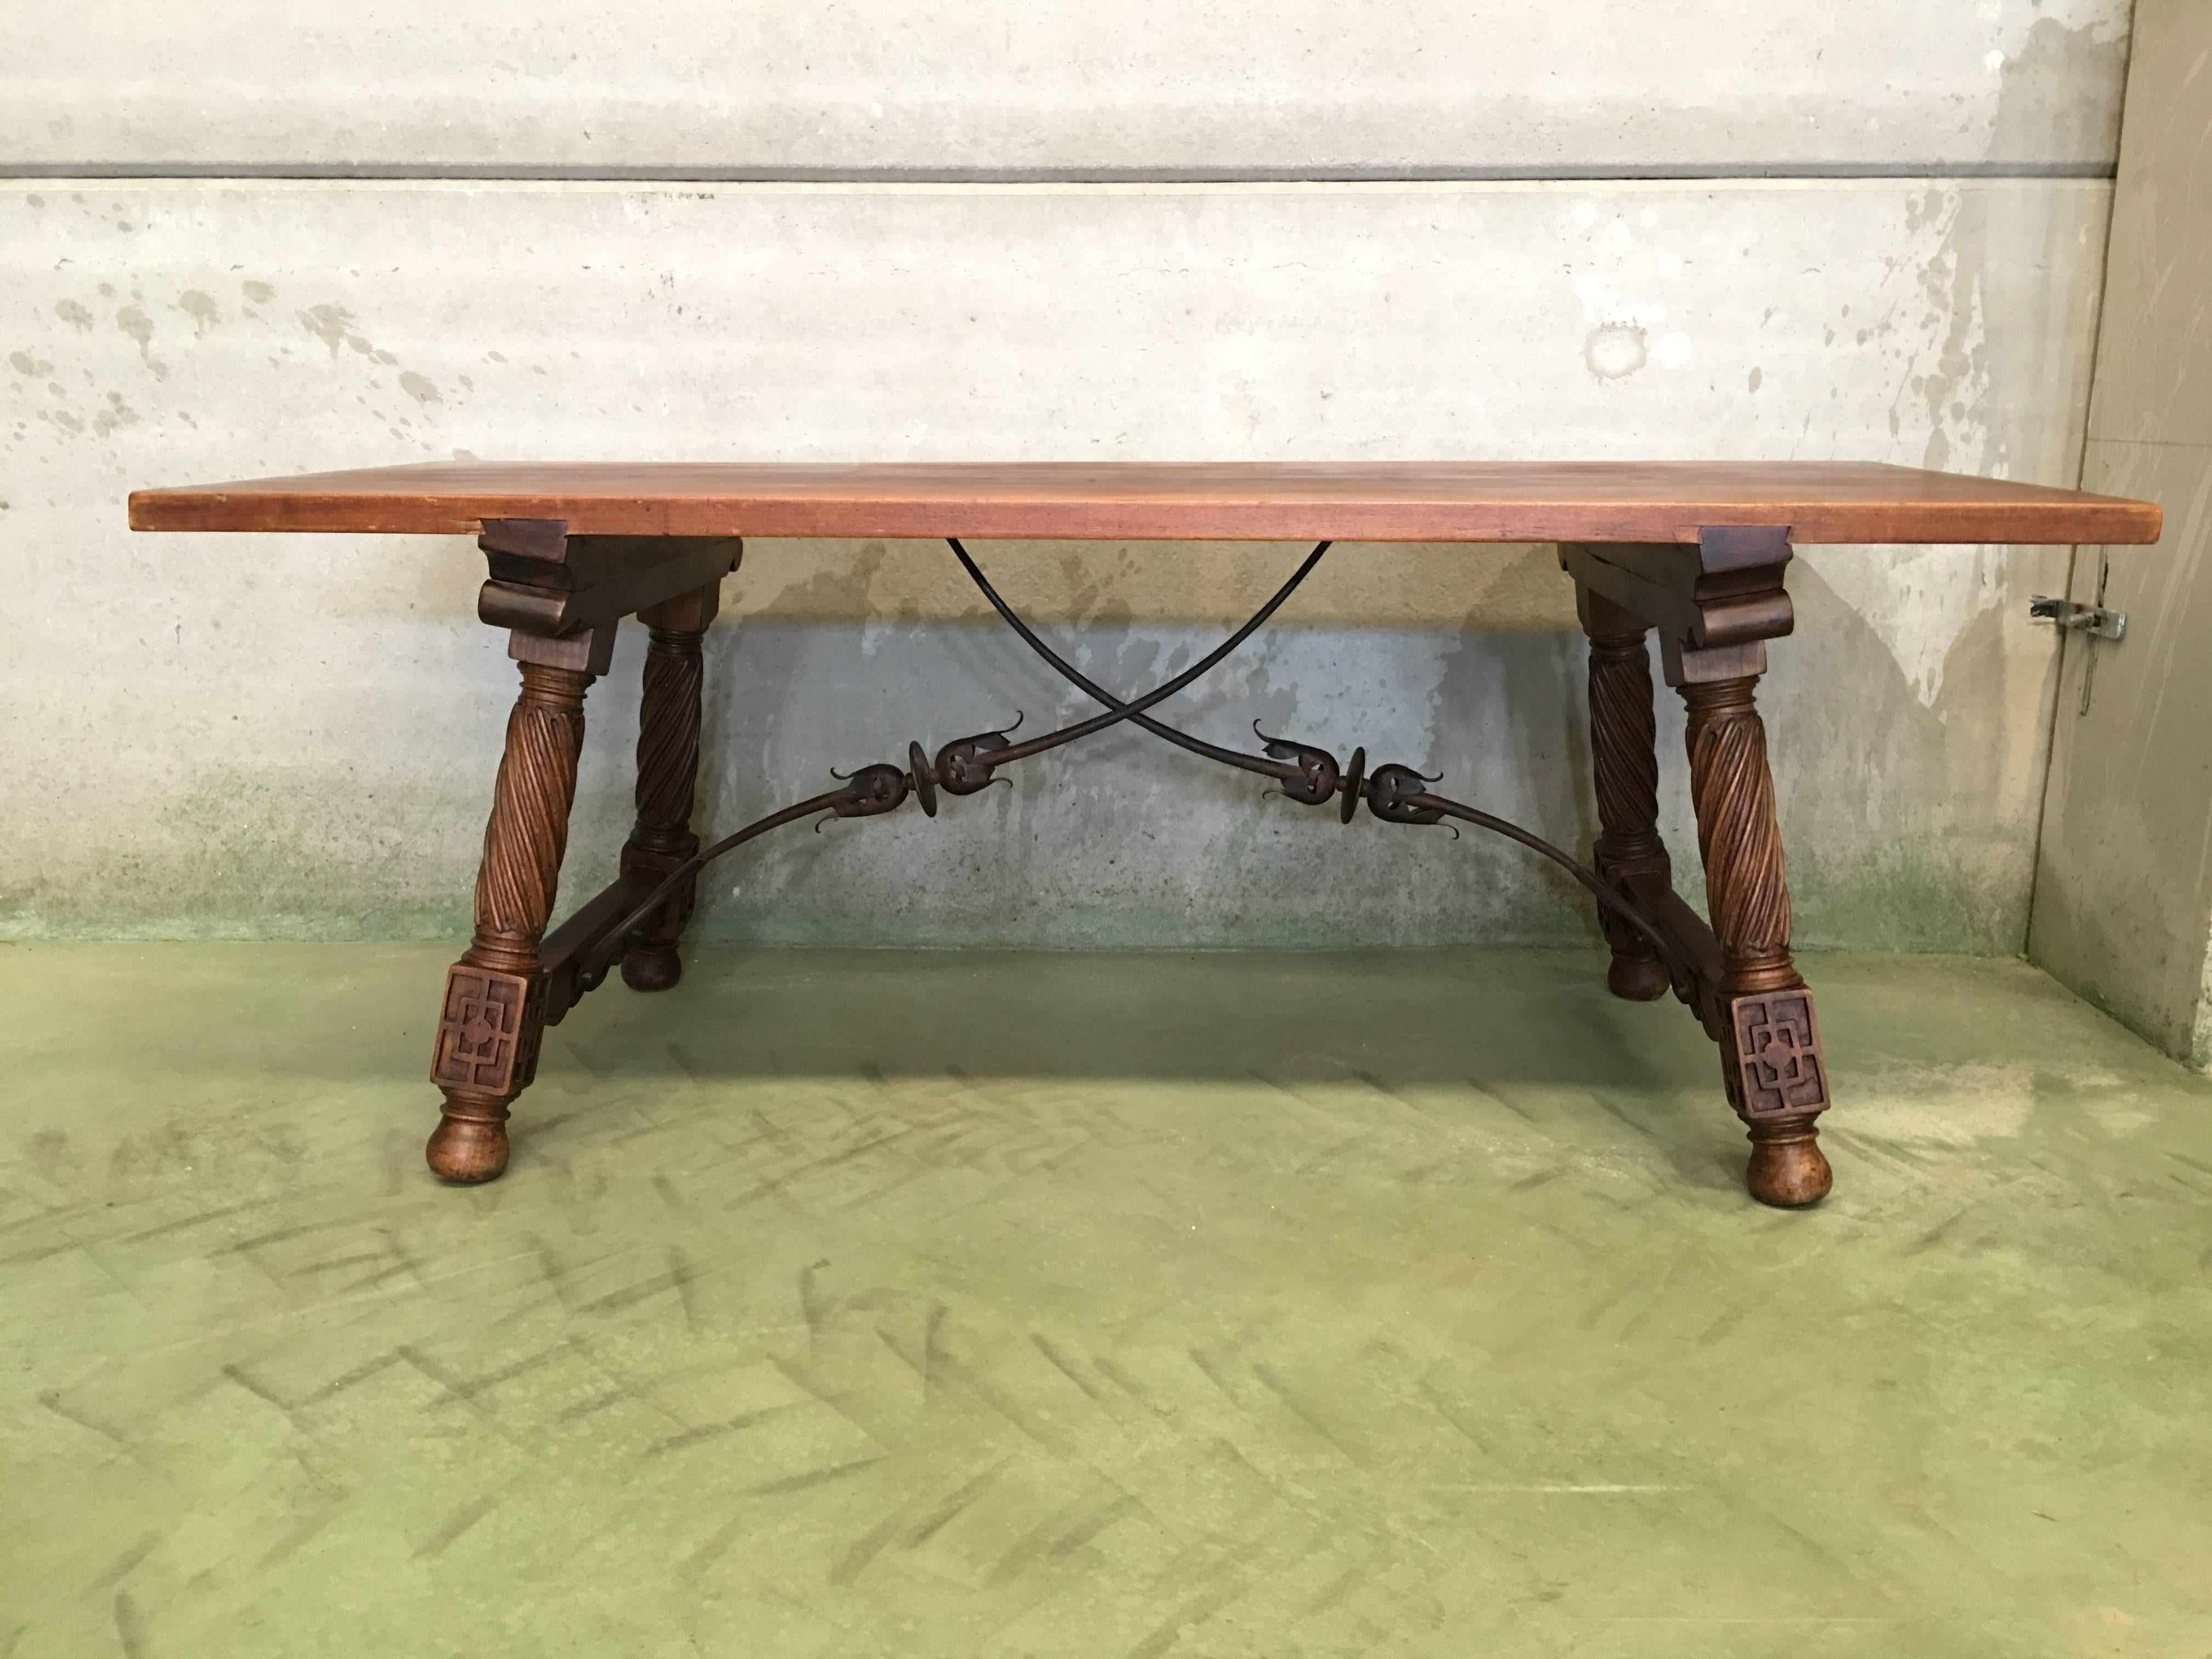 Late 18th Century 18th Spanish Refectory Desk Table with Solomonic Legs and Iron Stretcher